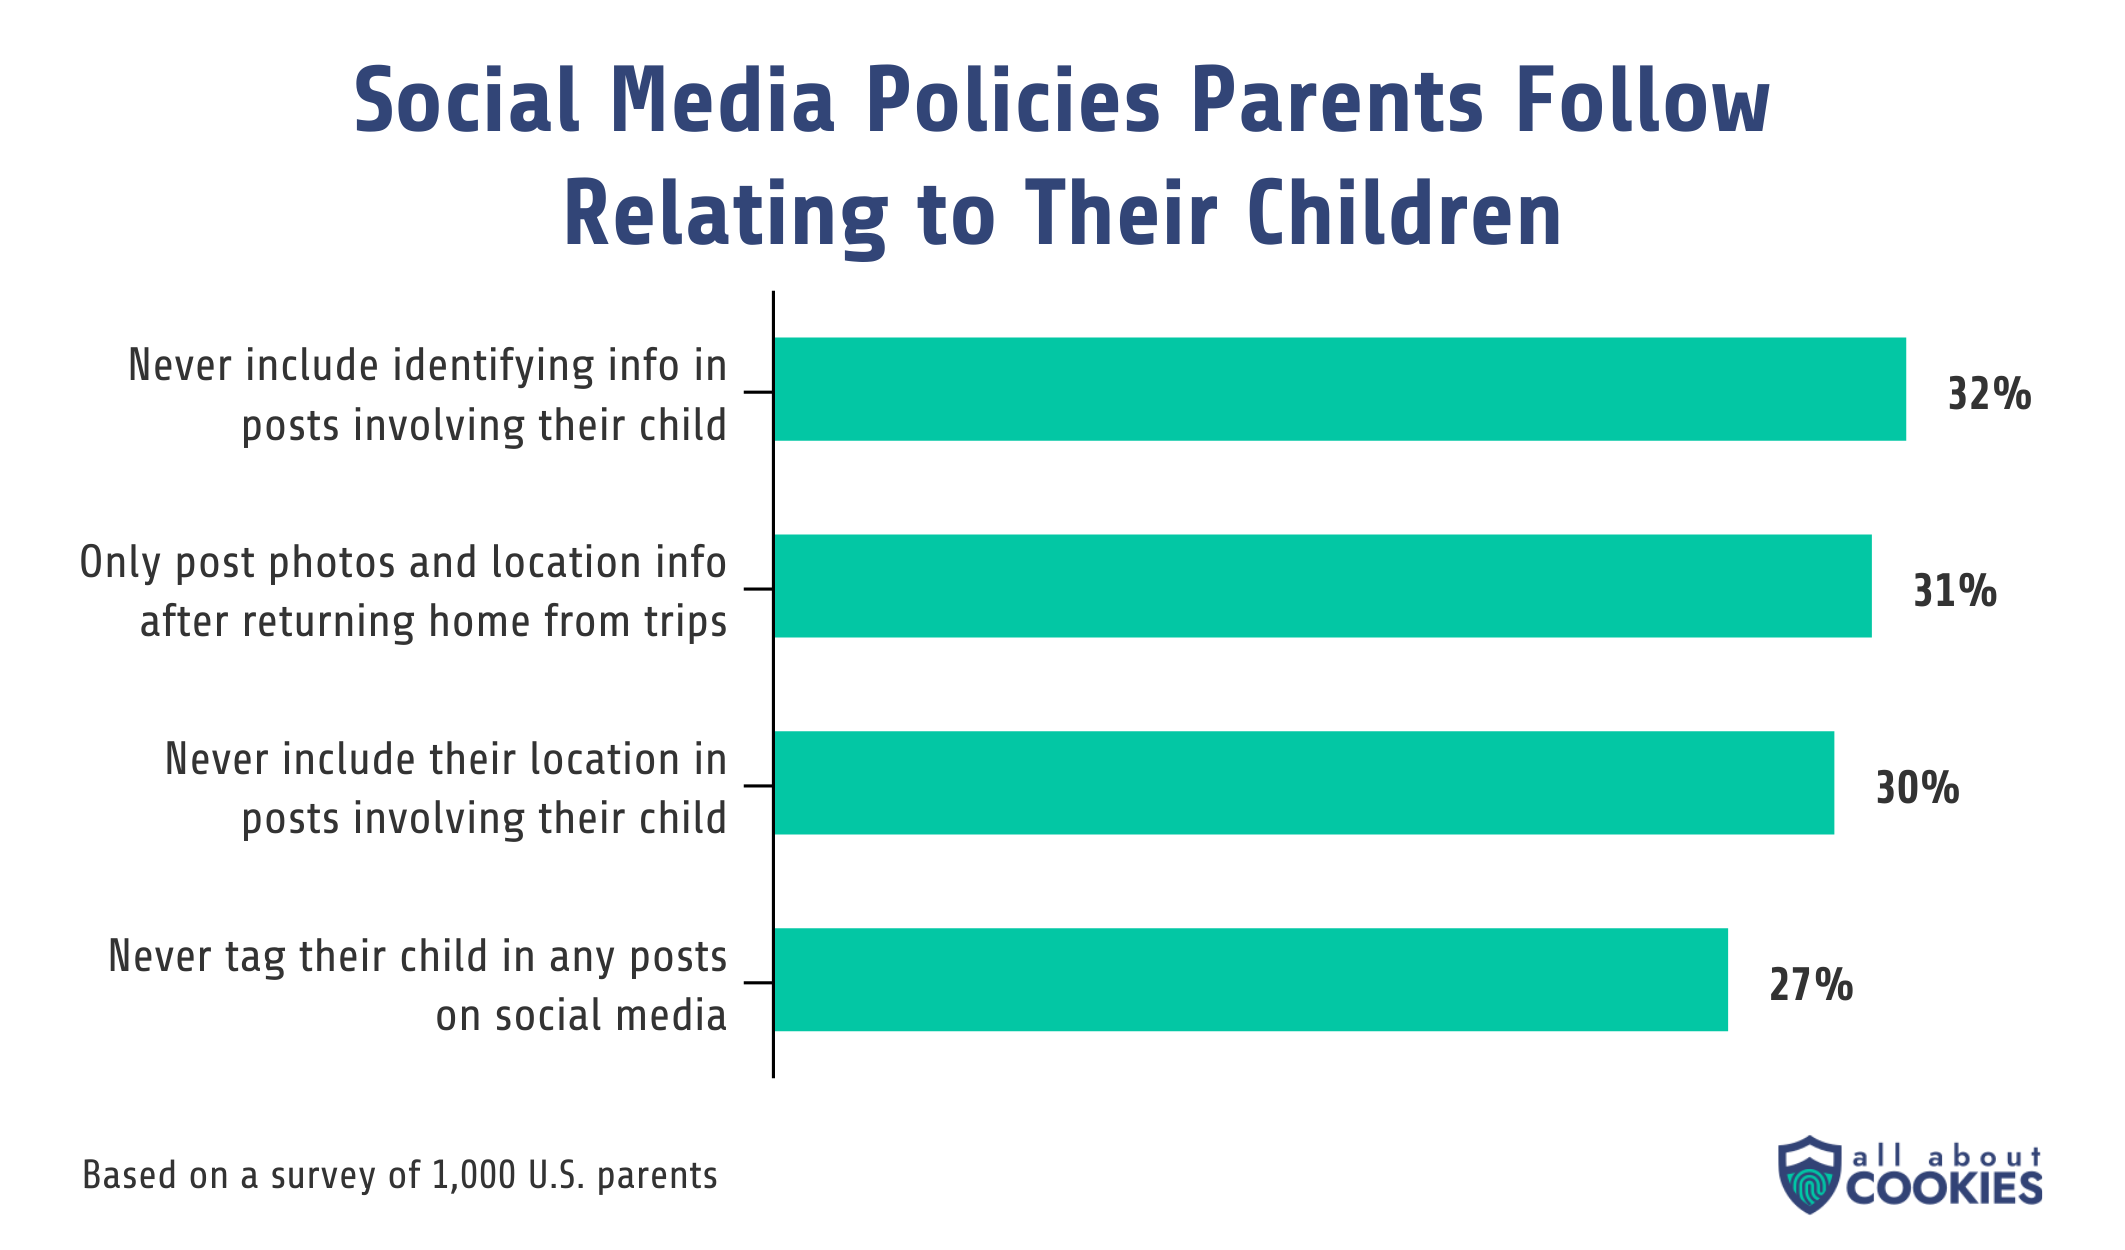 A bar chart shows 32% of parents never include identifying info in posts about their child. 27% never tag theid kids in any social media posts.